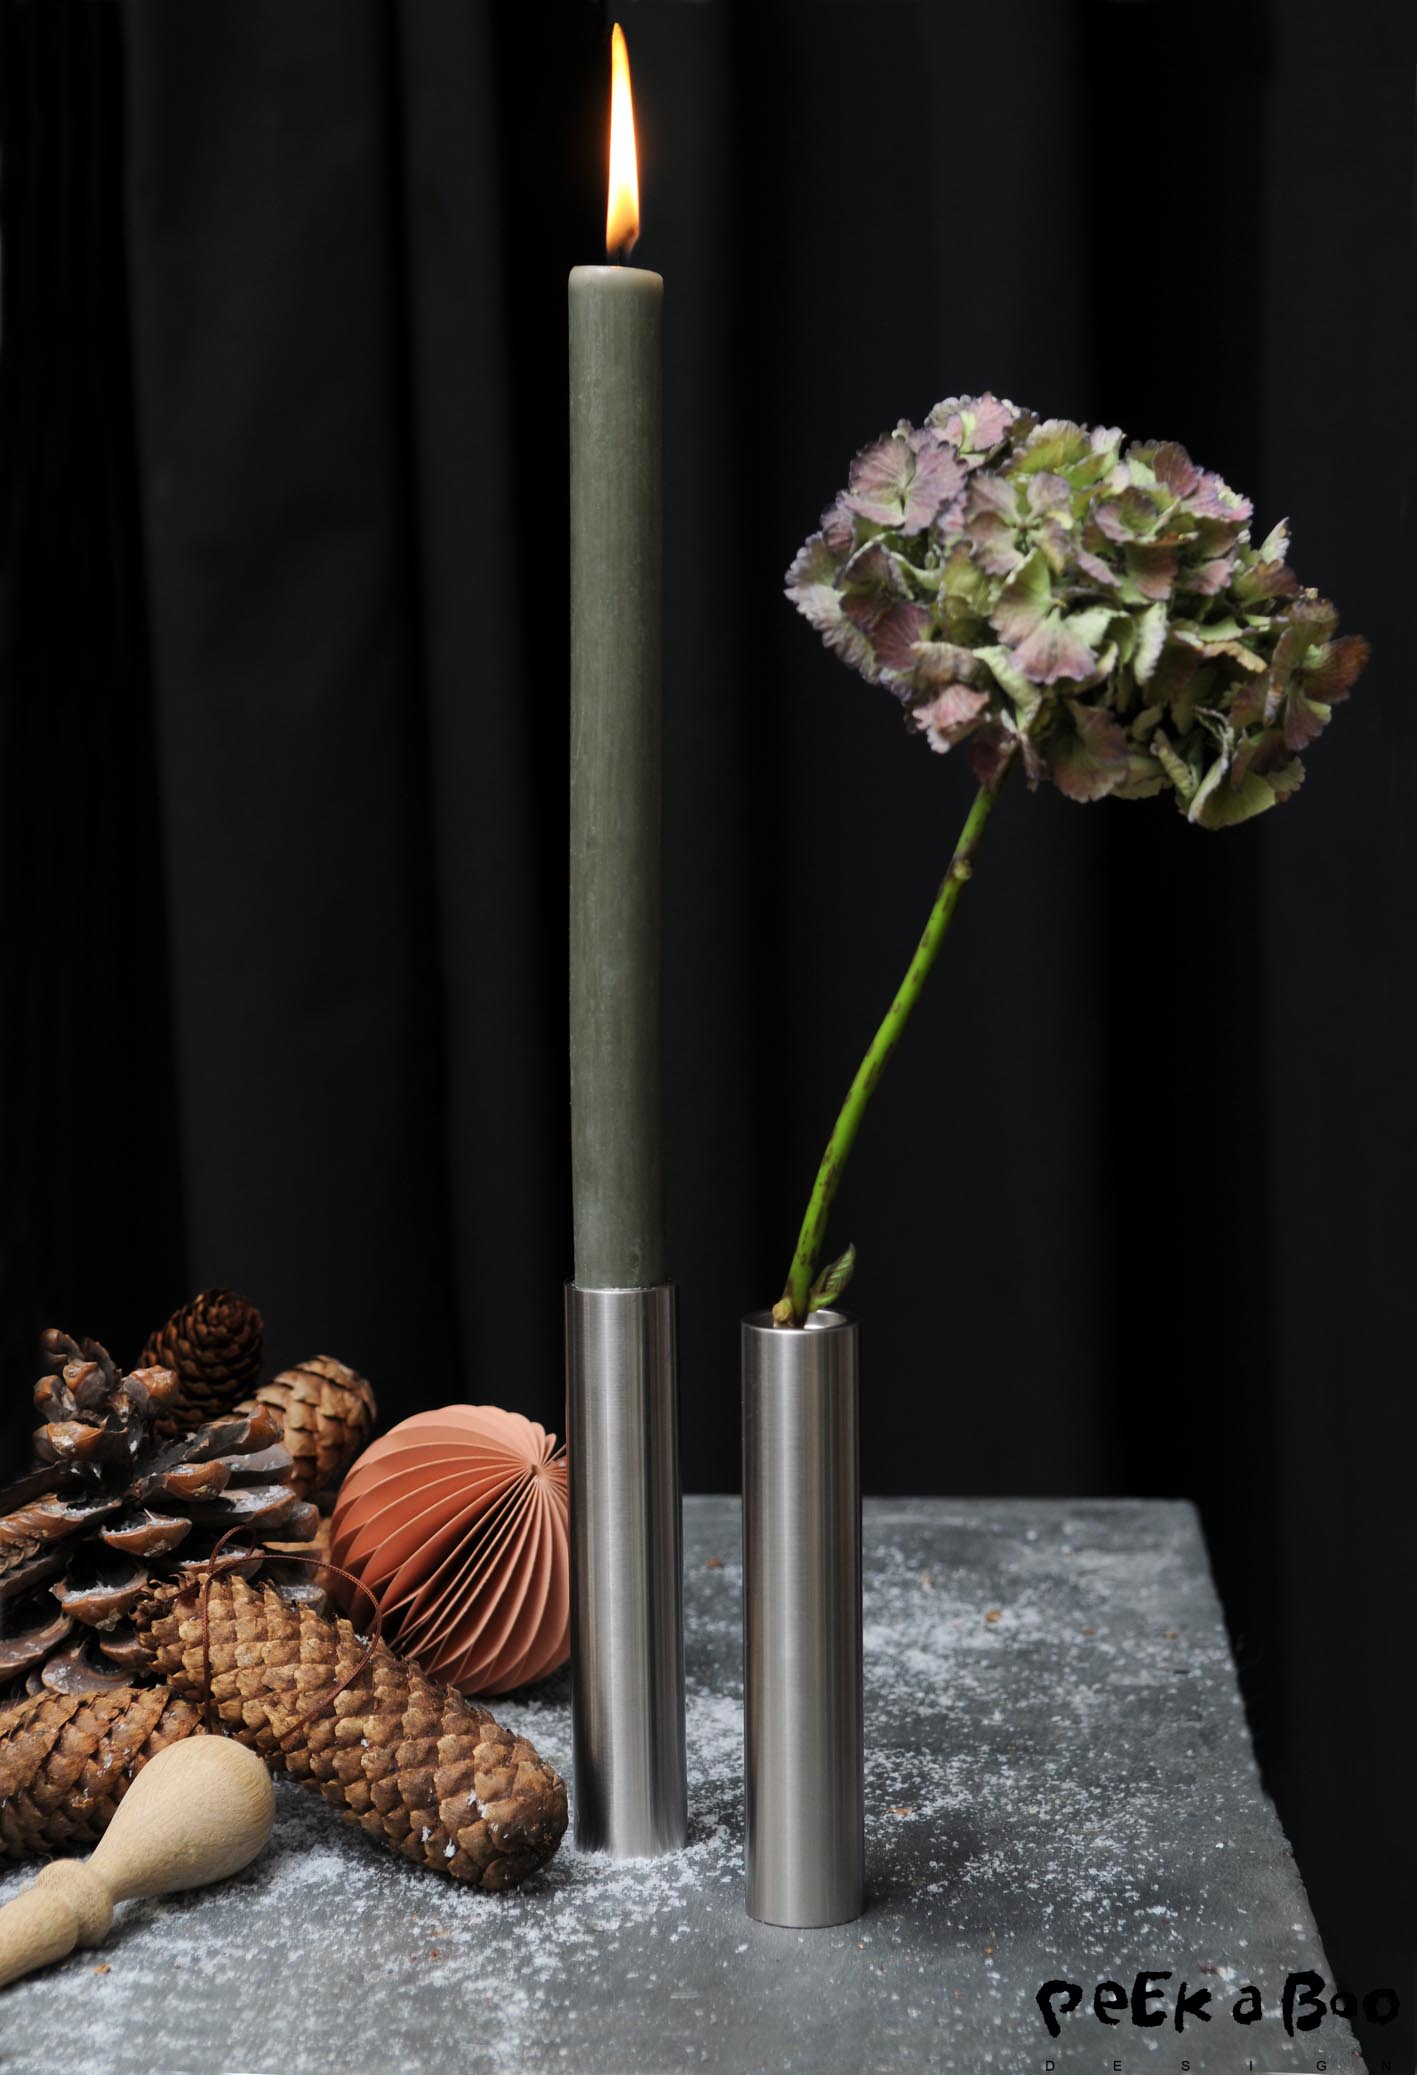 The vase and candlestick from Hove Home. It is in staninless steel and designed and produced in Denmark.